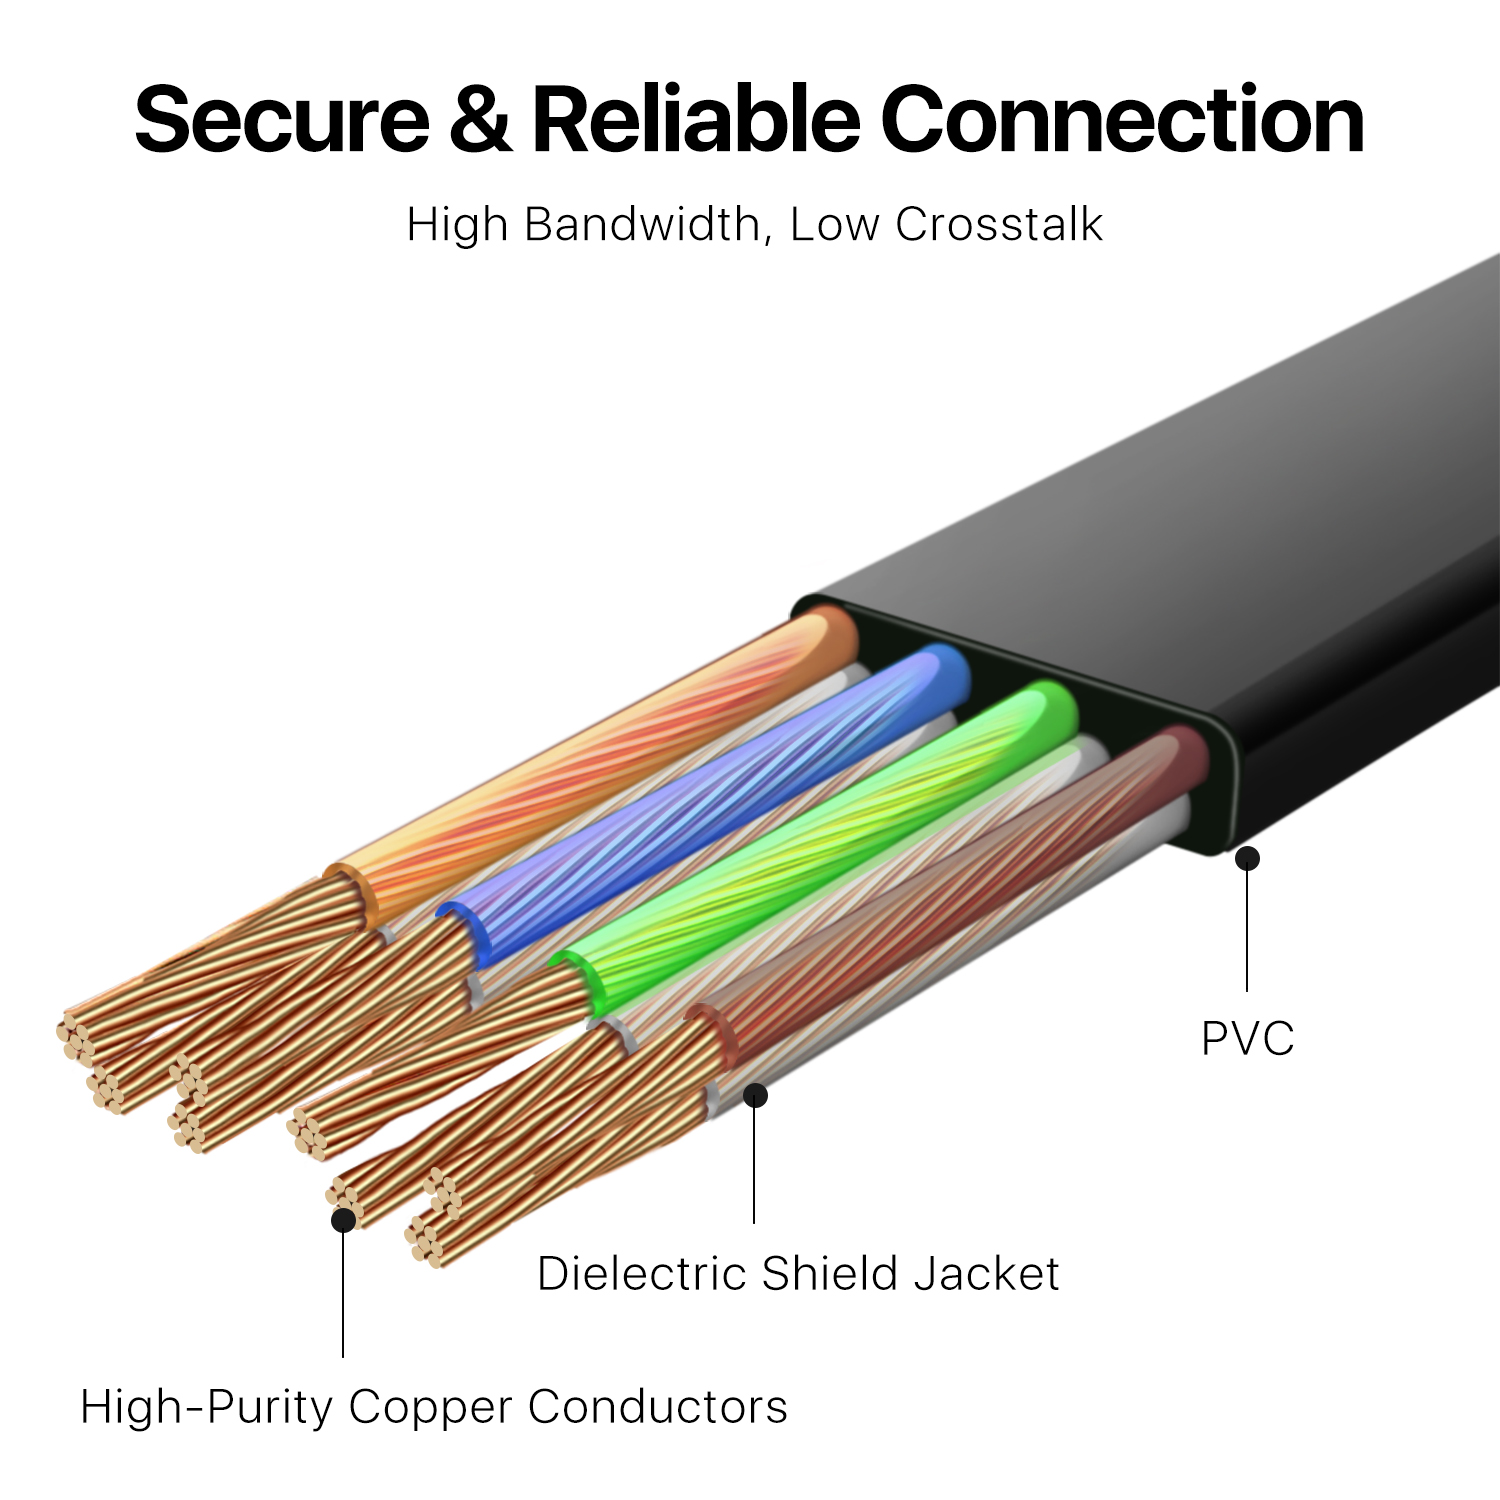 Cat6 patch cable connects all the hardware destinations on a Gigabit Local Area Network (LAN), such as PCs, computer servers, printers, routers, switch boxes, network media players, NAS, VoIP phones, PoE devices, and more; Supports: Gigabit 1000 BASE-T; 100 BASE-T; 10 BASE-T. Meets or exceeds Category 6 performance in compliance with the TIA/EIA 568-C.2 standard